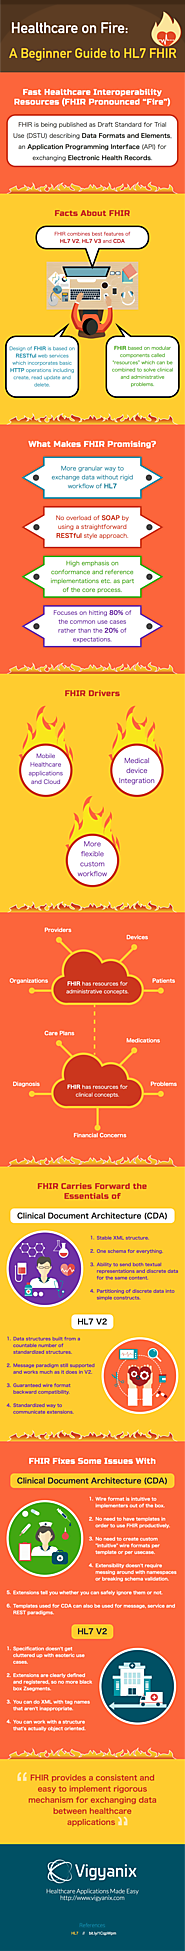 Healthcare on Fire: A Beginner Guide to HL7 FHIR [Infographic]